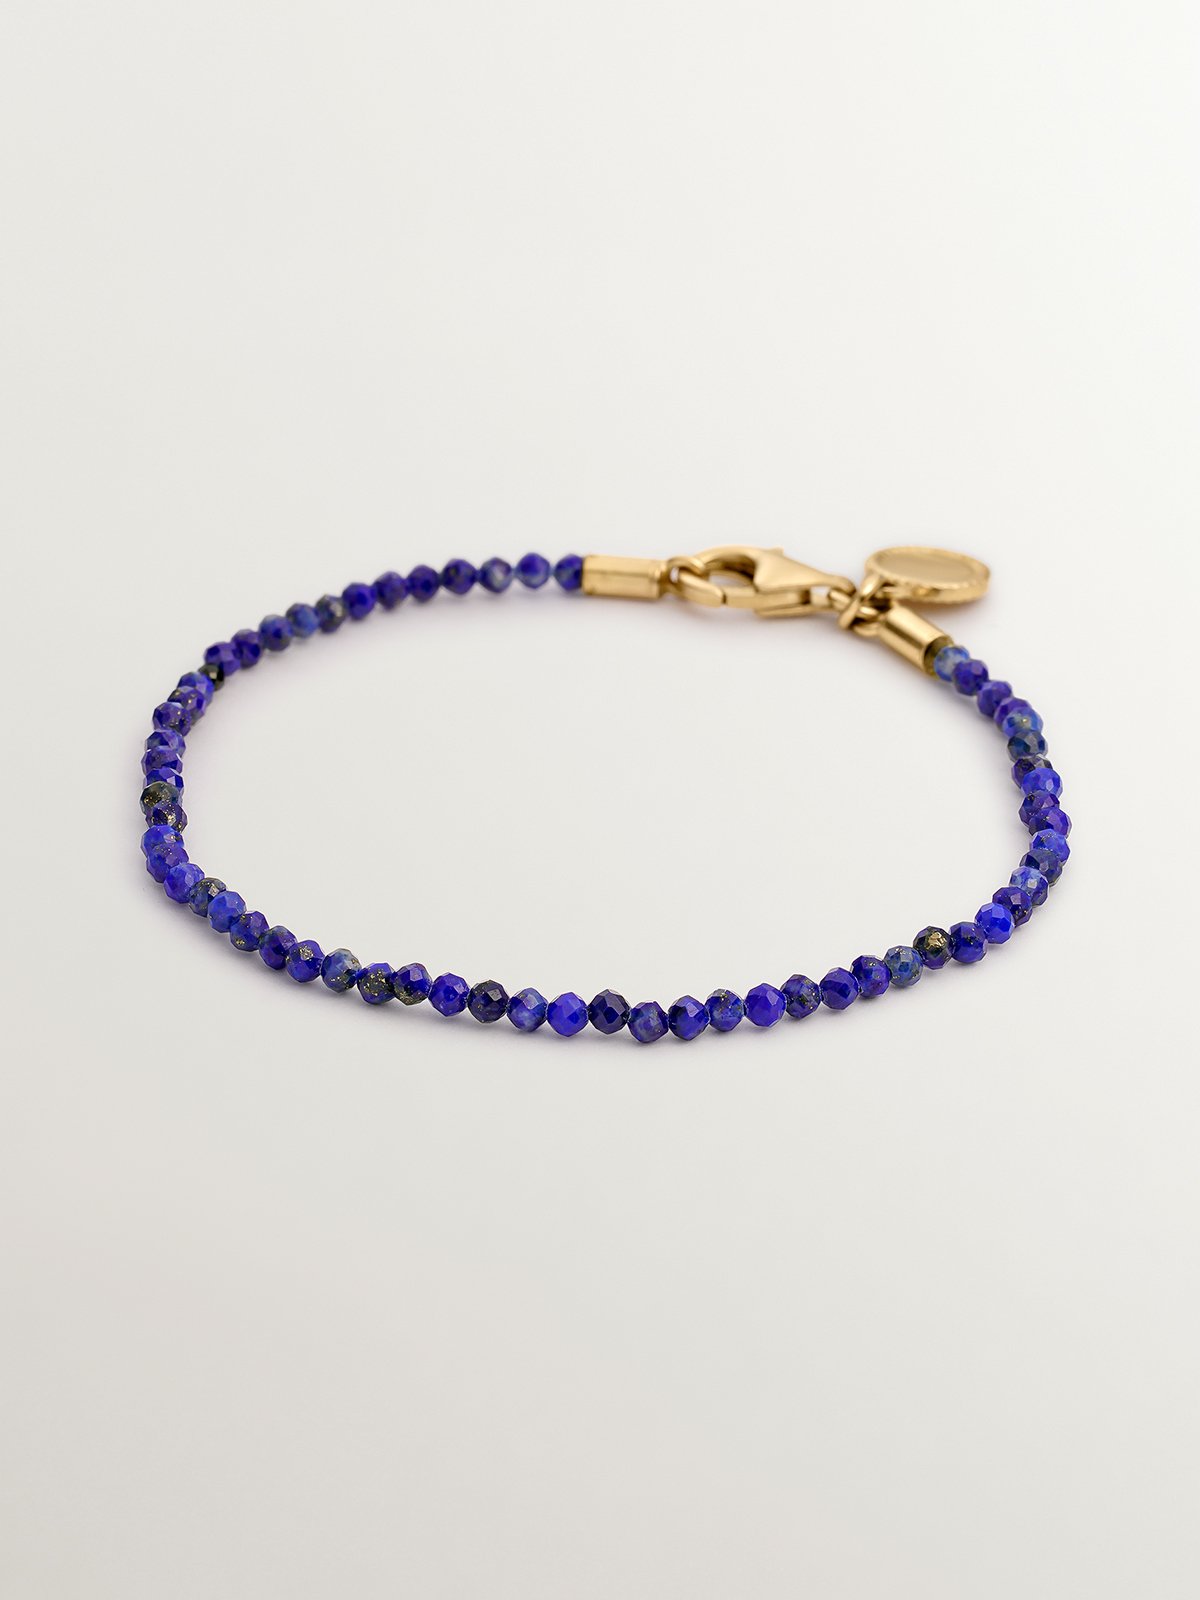 925 Sterling Silver bracelet plated in 18K Yellow Gold with Lapis Lazuli